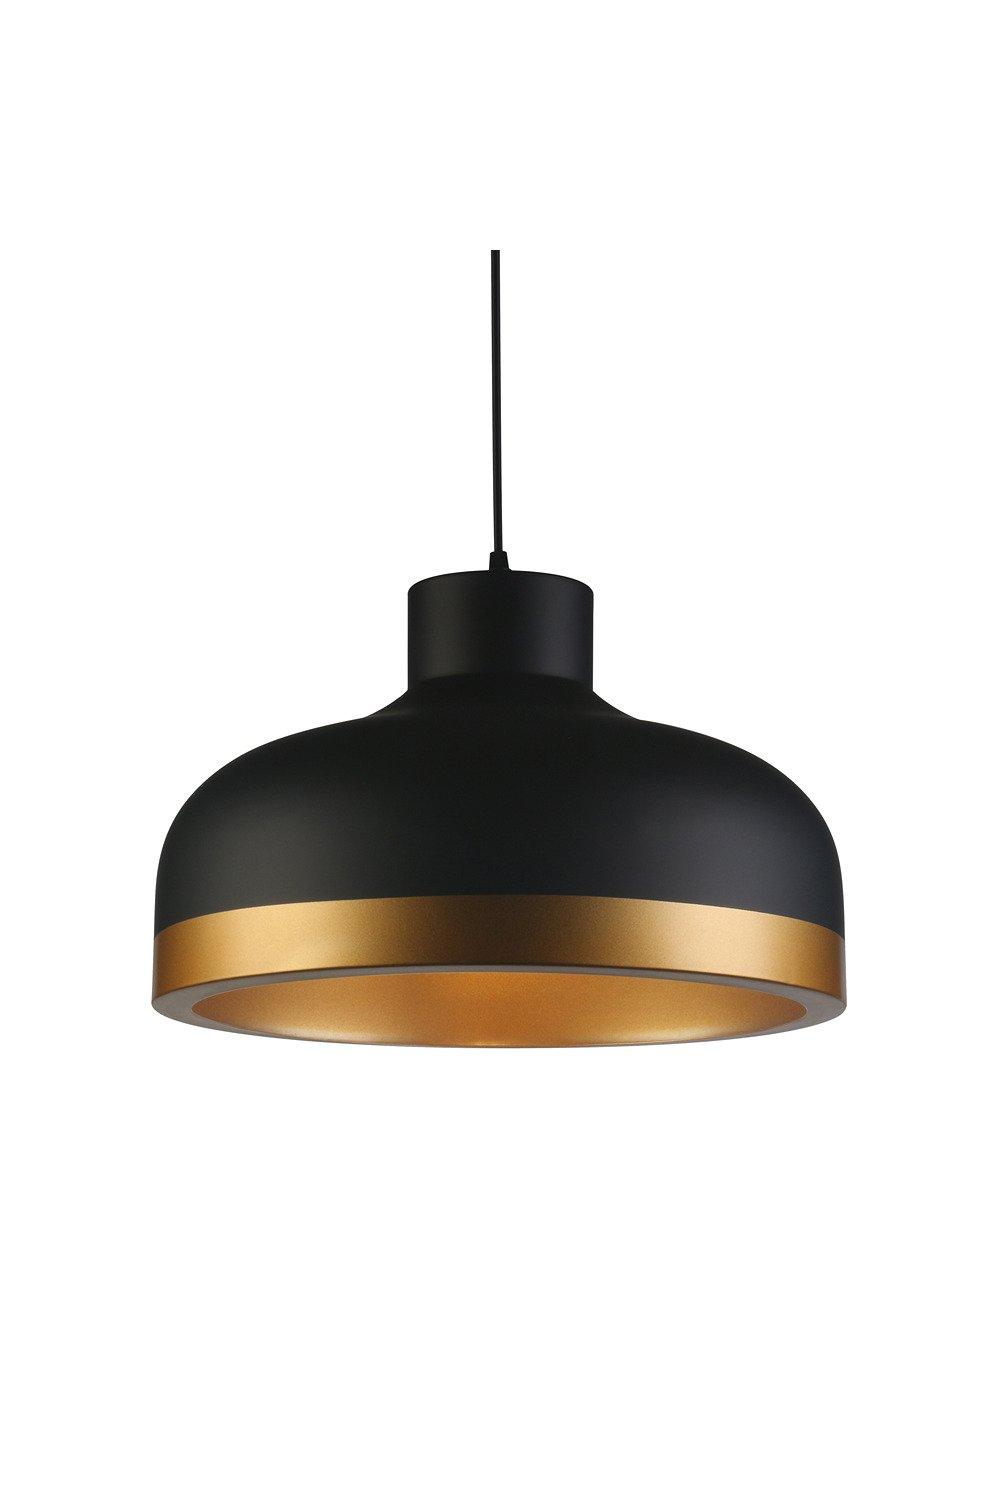 Goldi Extra Large Black Dome Ceiling Pendant Light with Gold Trim